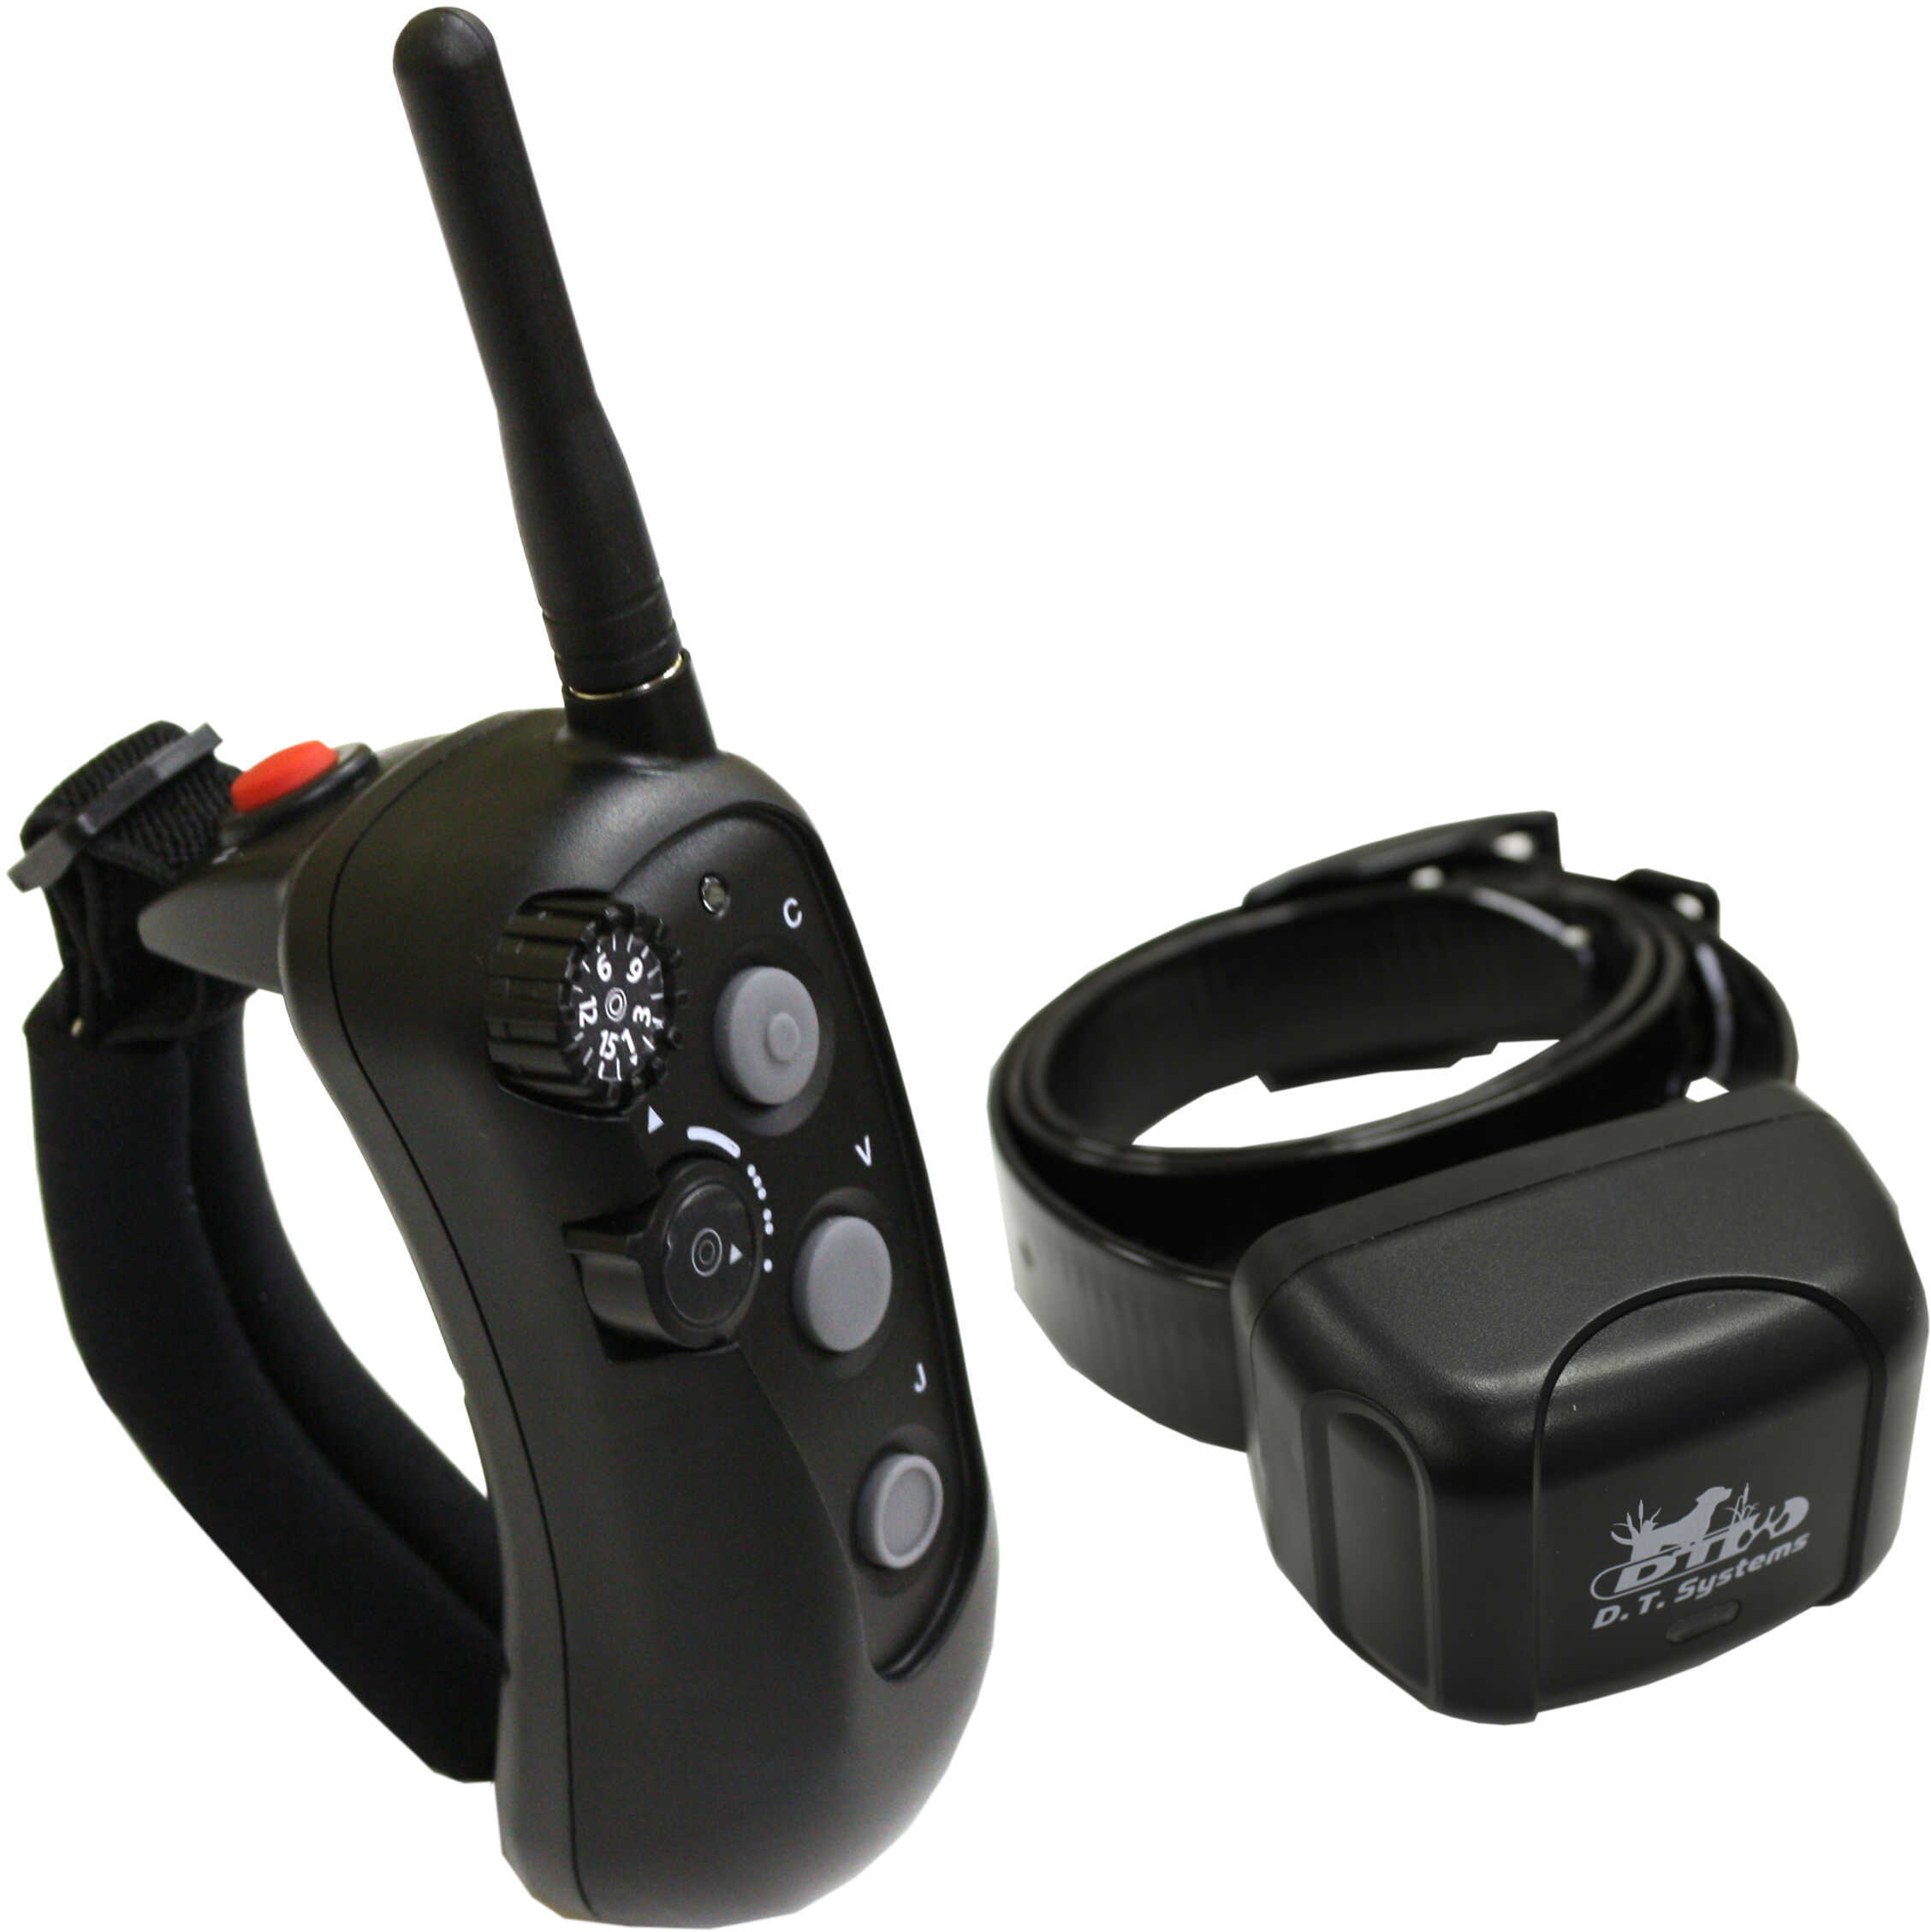 D.T. Systems Rapid Access Pro Trainer "Hands Free" 1400Yd RG